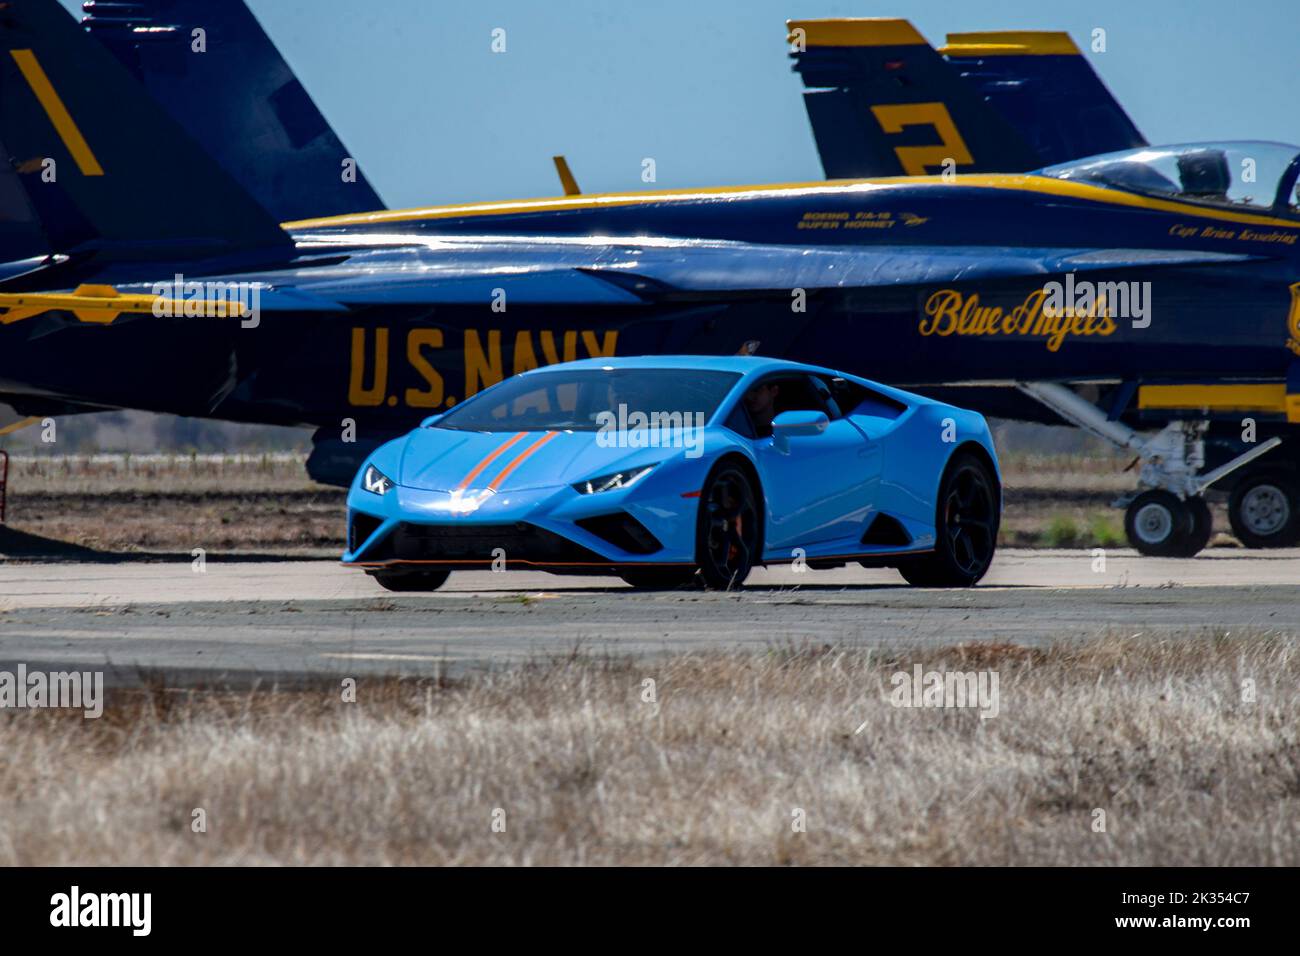 A Lamborghini Aventador drives on the flight line during the 2022 Marine Corps Air Station Miramar Air Show at MCAS Miramar, San Diego, California, Sept. 23, 2022. The theme for the 2022 MCAS Miramar Air Show, “Marines Fight, Evolve and Win,” reflects the Marine Corps’ ongoing modernization efforts to prepare for future conflicts. (U.S. Marine Corps photo by Lance Cpl. Zachary Larsen) Stock Photo